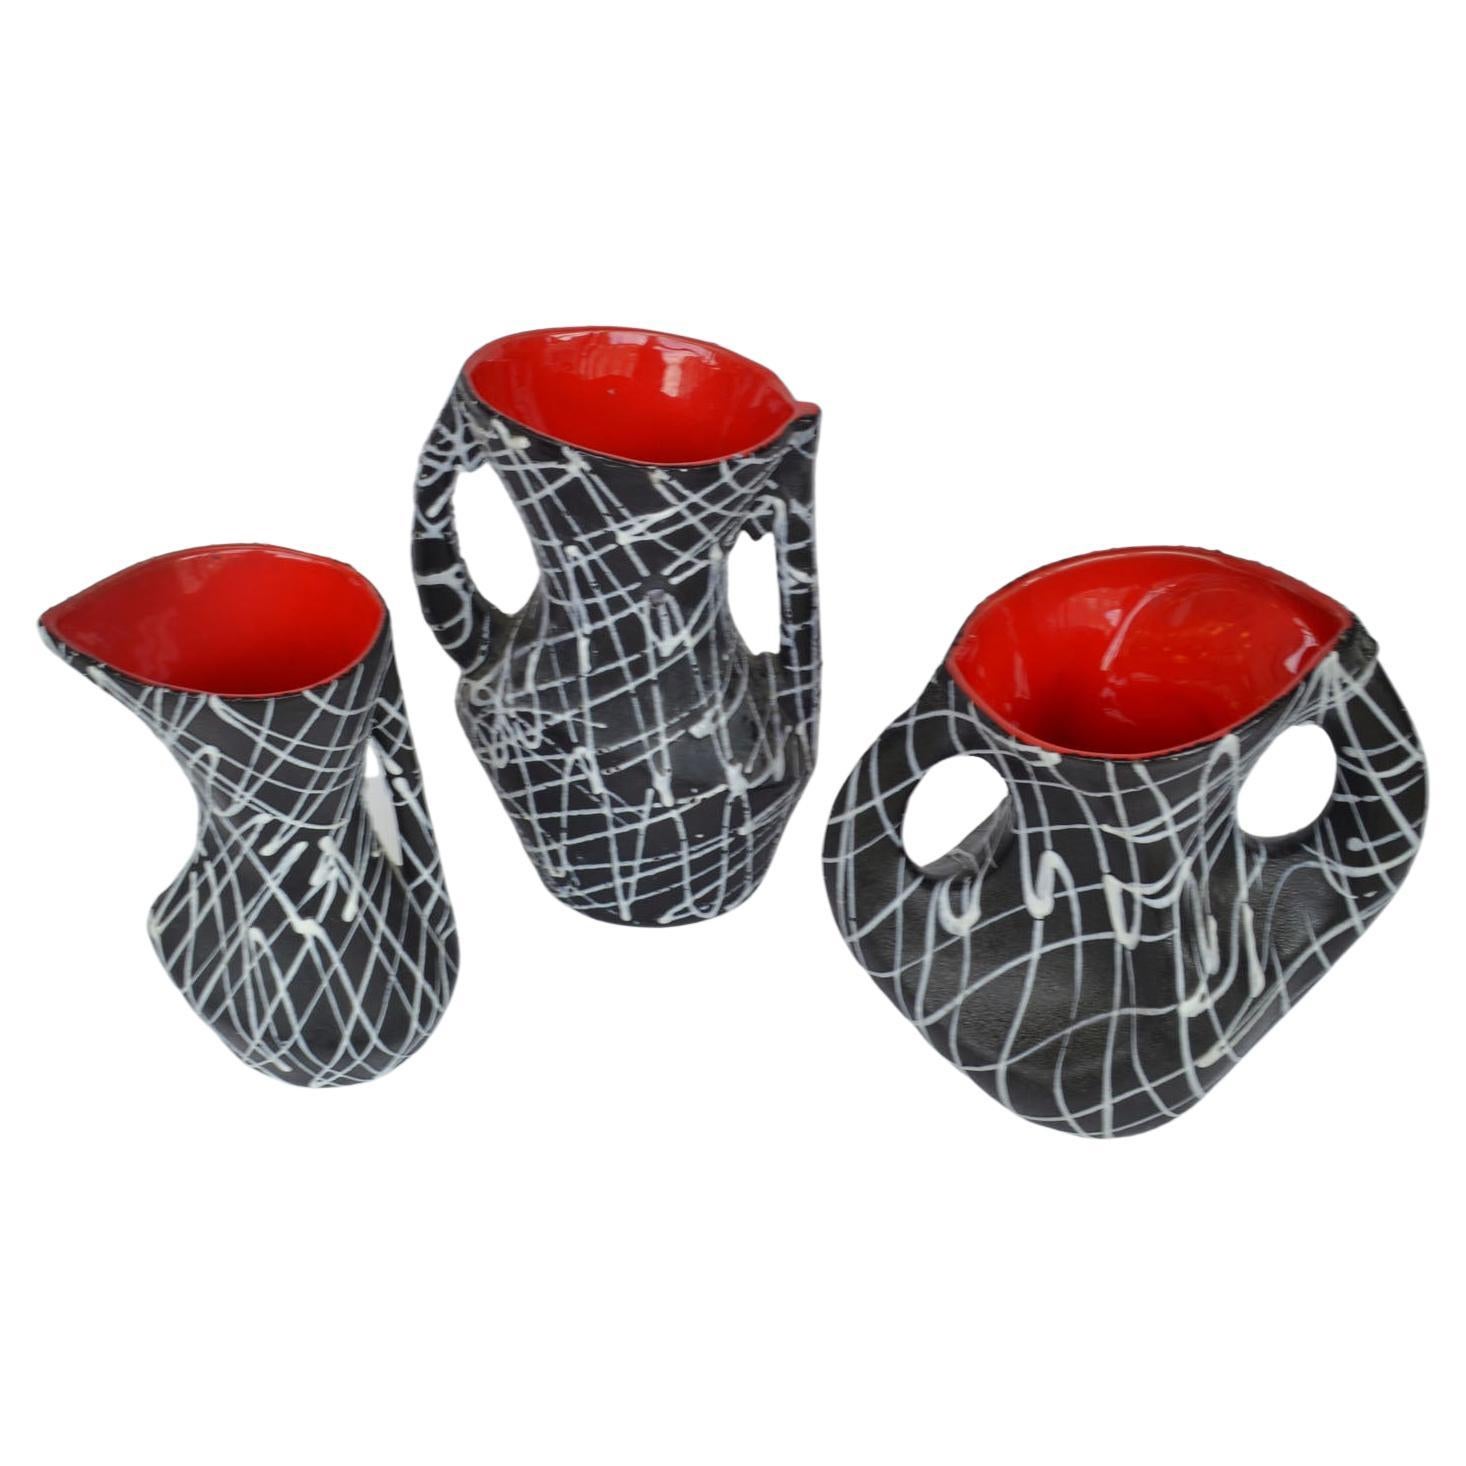 Three freeform vases decorated with a expressive patterns like the action paintings of Jackson Pollock in white on a black glaze background and vibrant red glaze inside . Made in France 1950s and signed Vallauris.